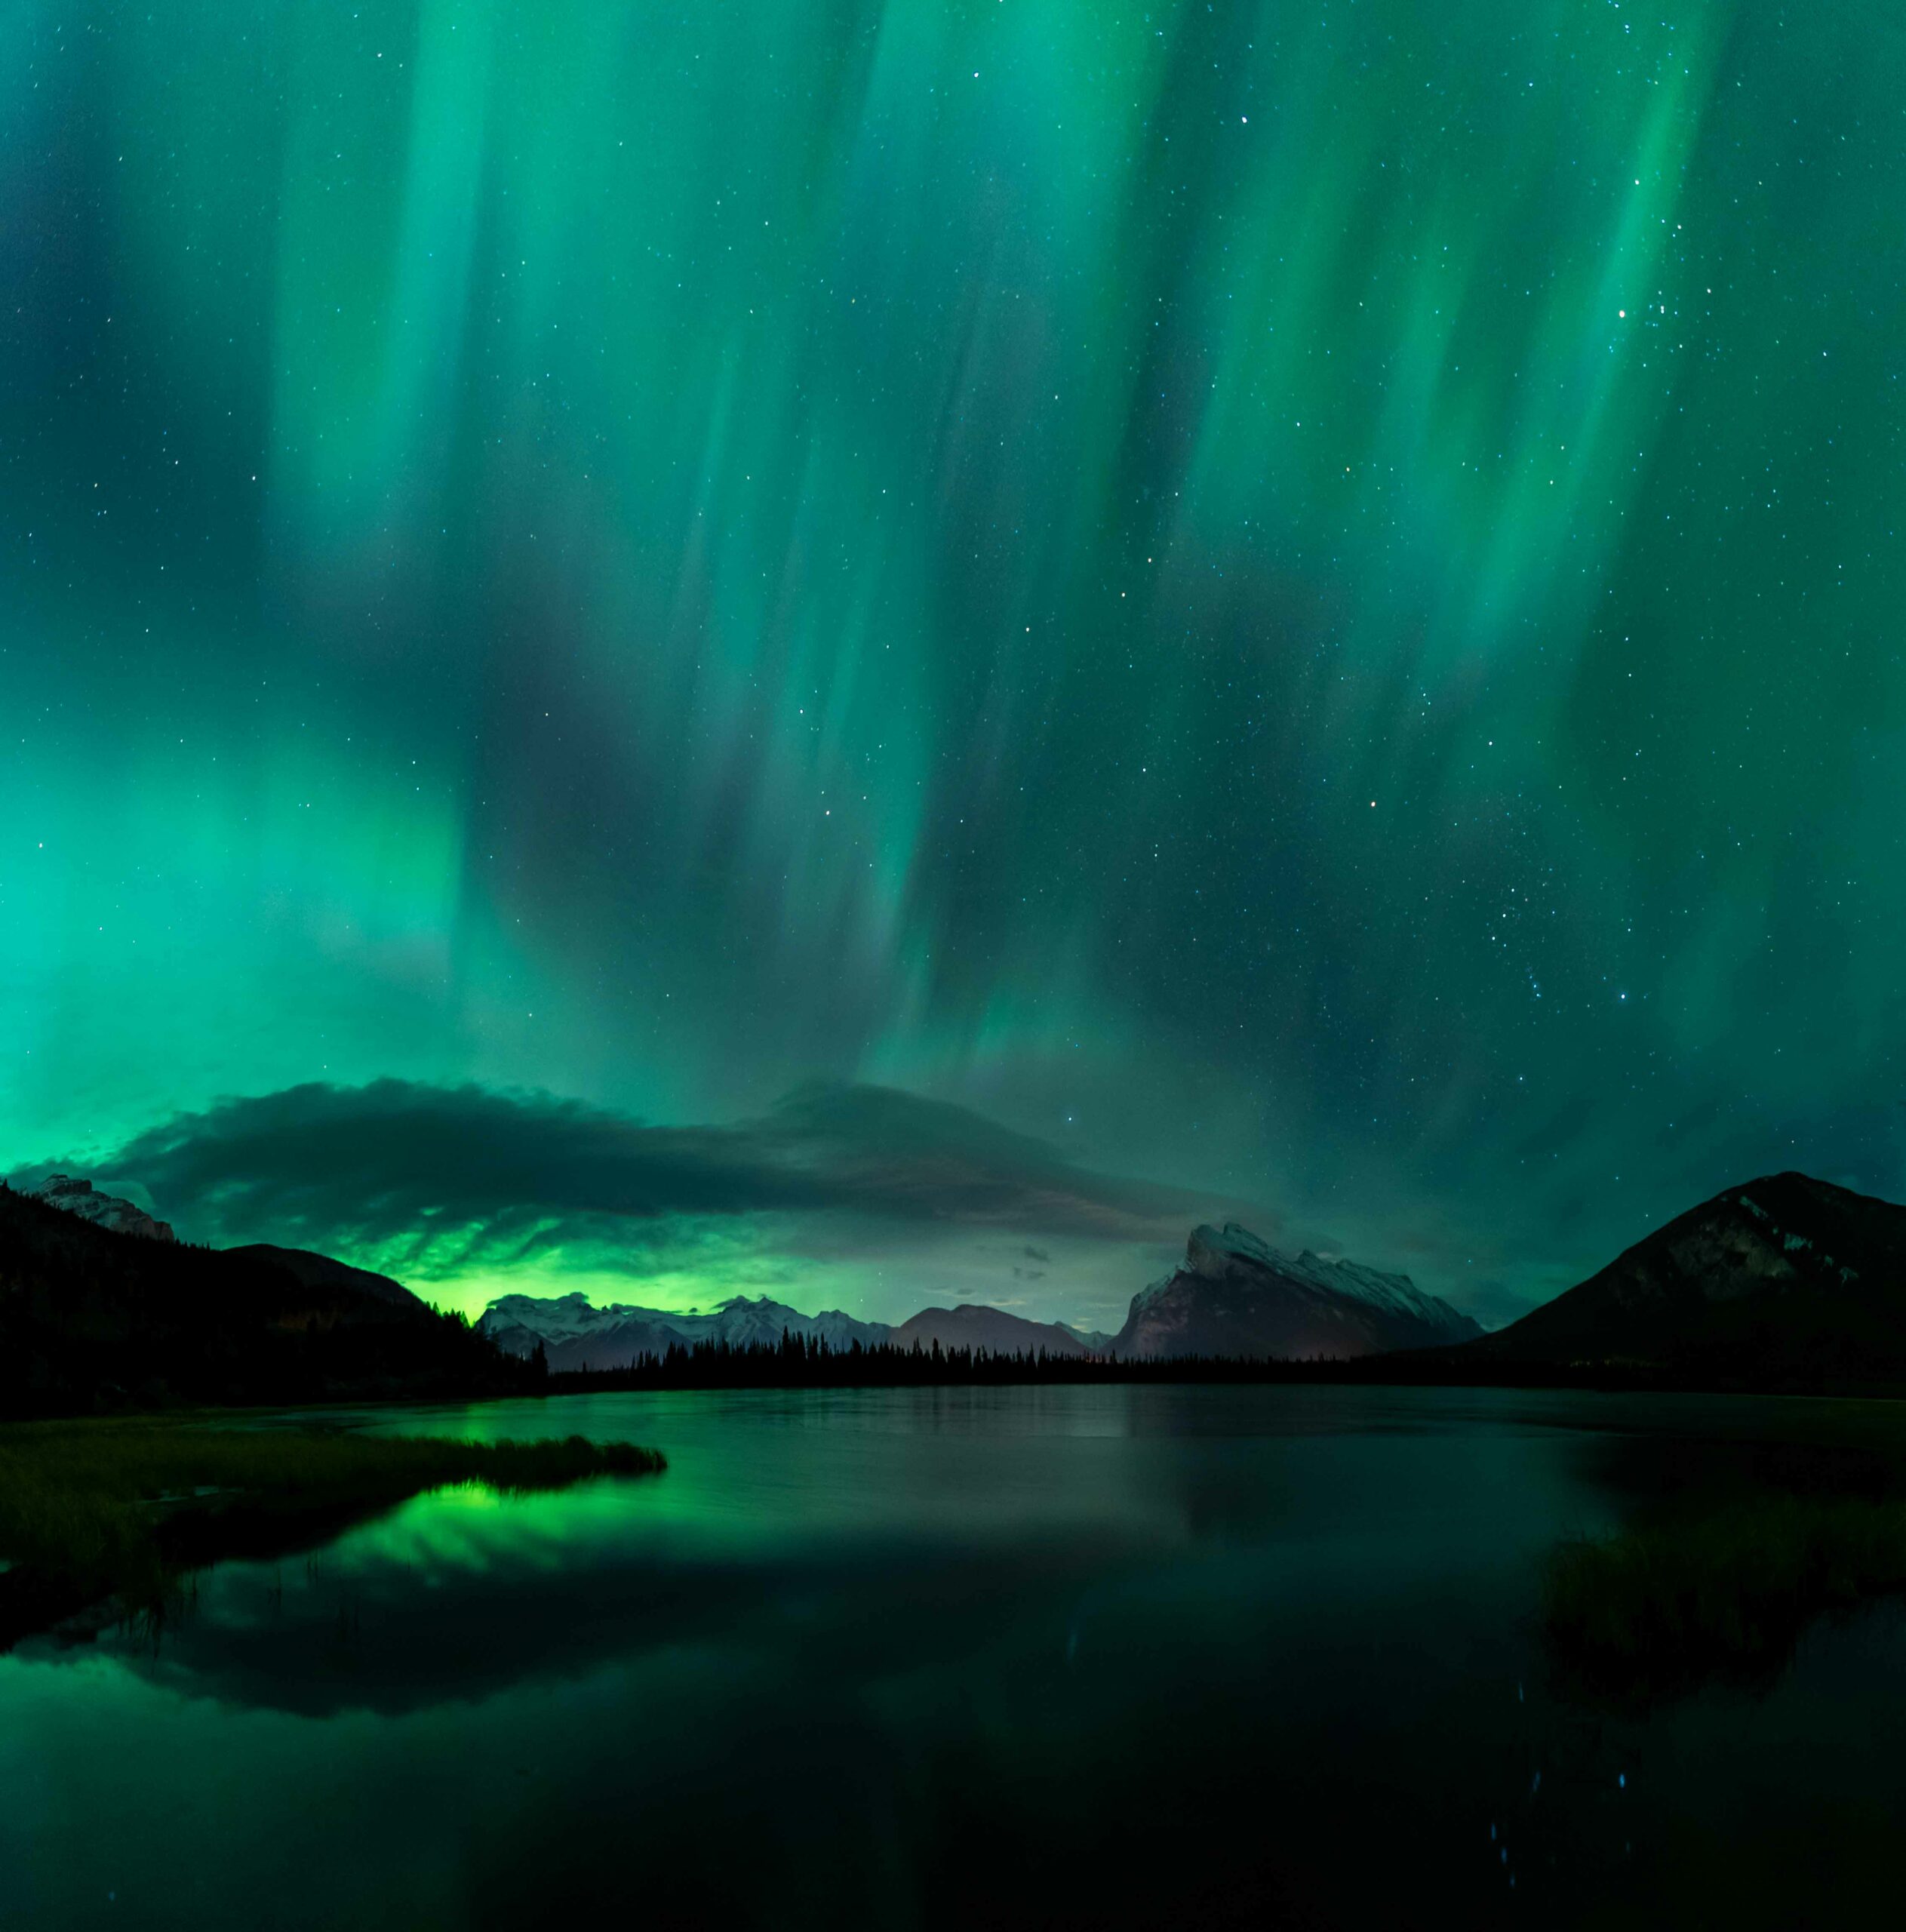 A green wave of Northern Lights reflected in the lake